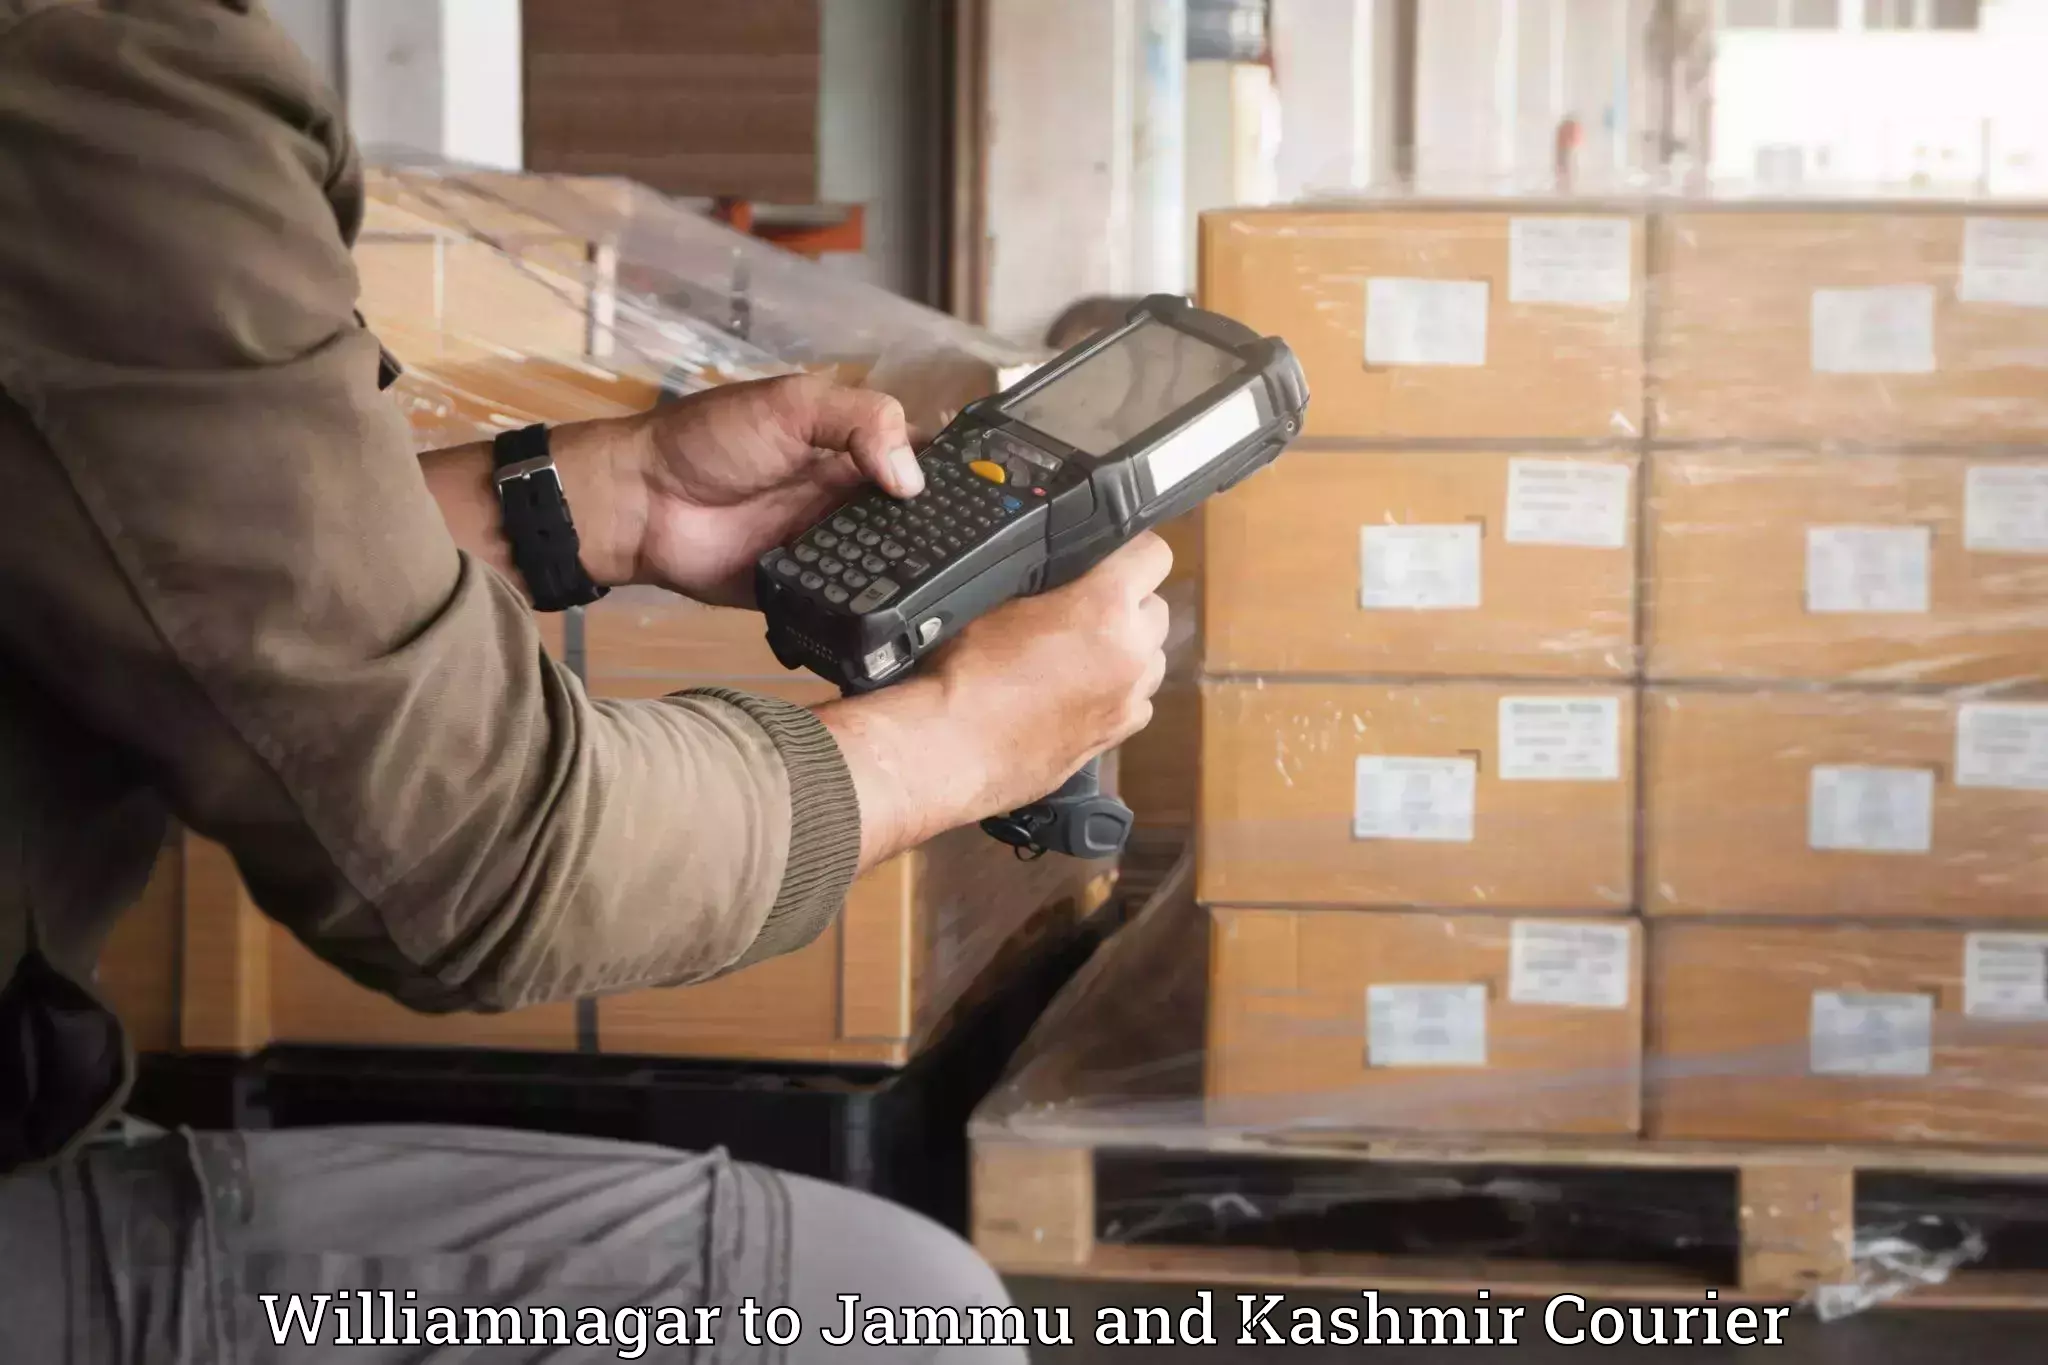 Furniture relocation experts Williamnagar to Pulwama